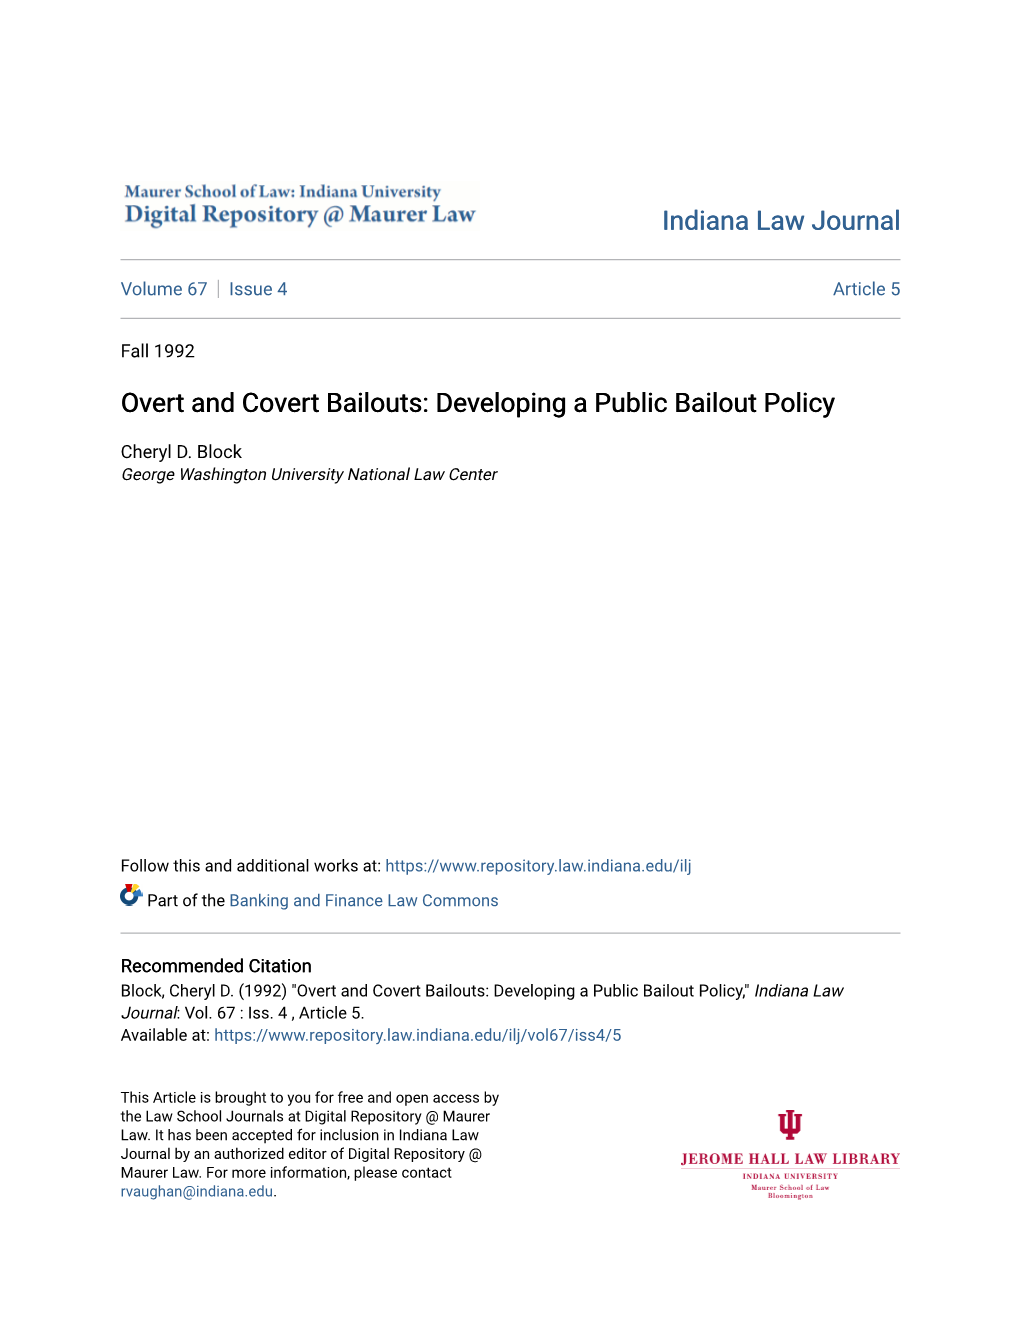 Overt and Covert Bailouts: Developing a Public Bailout Policy